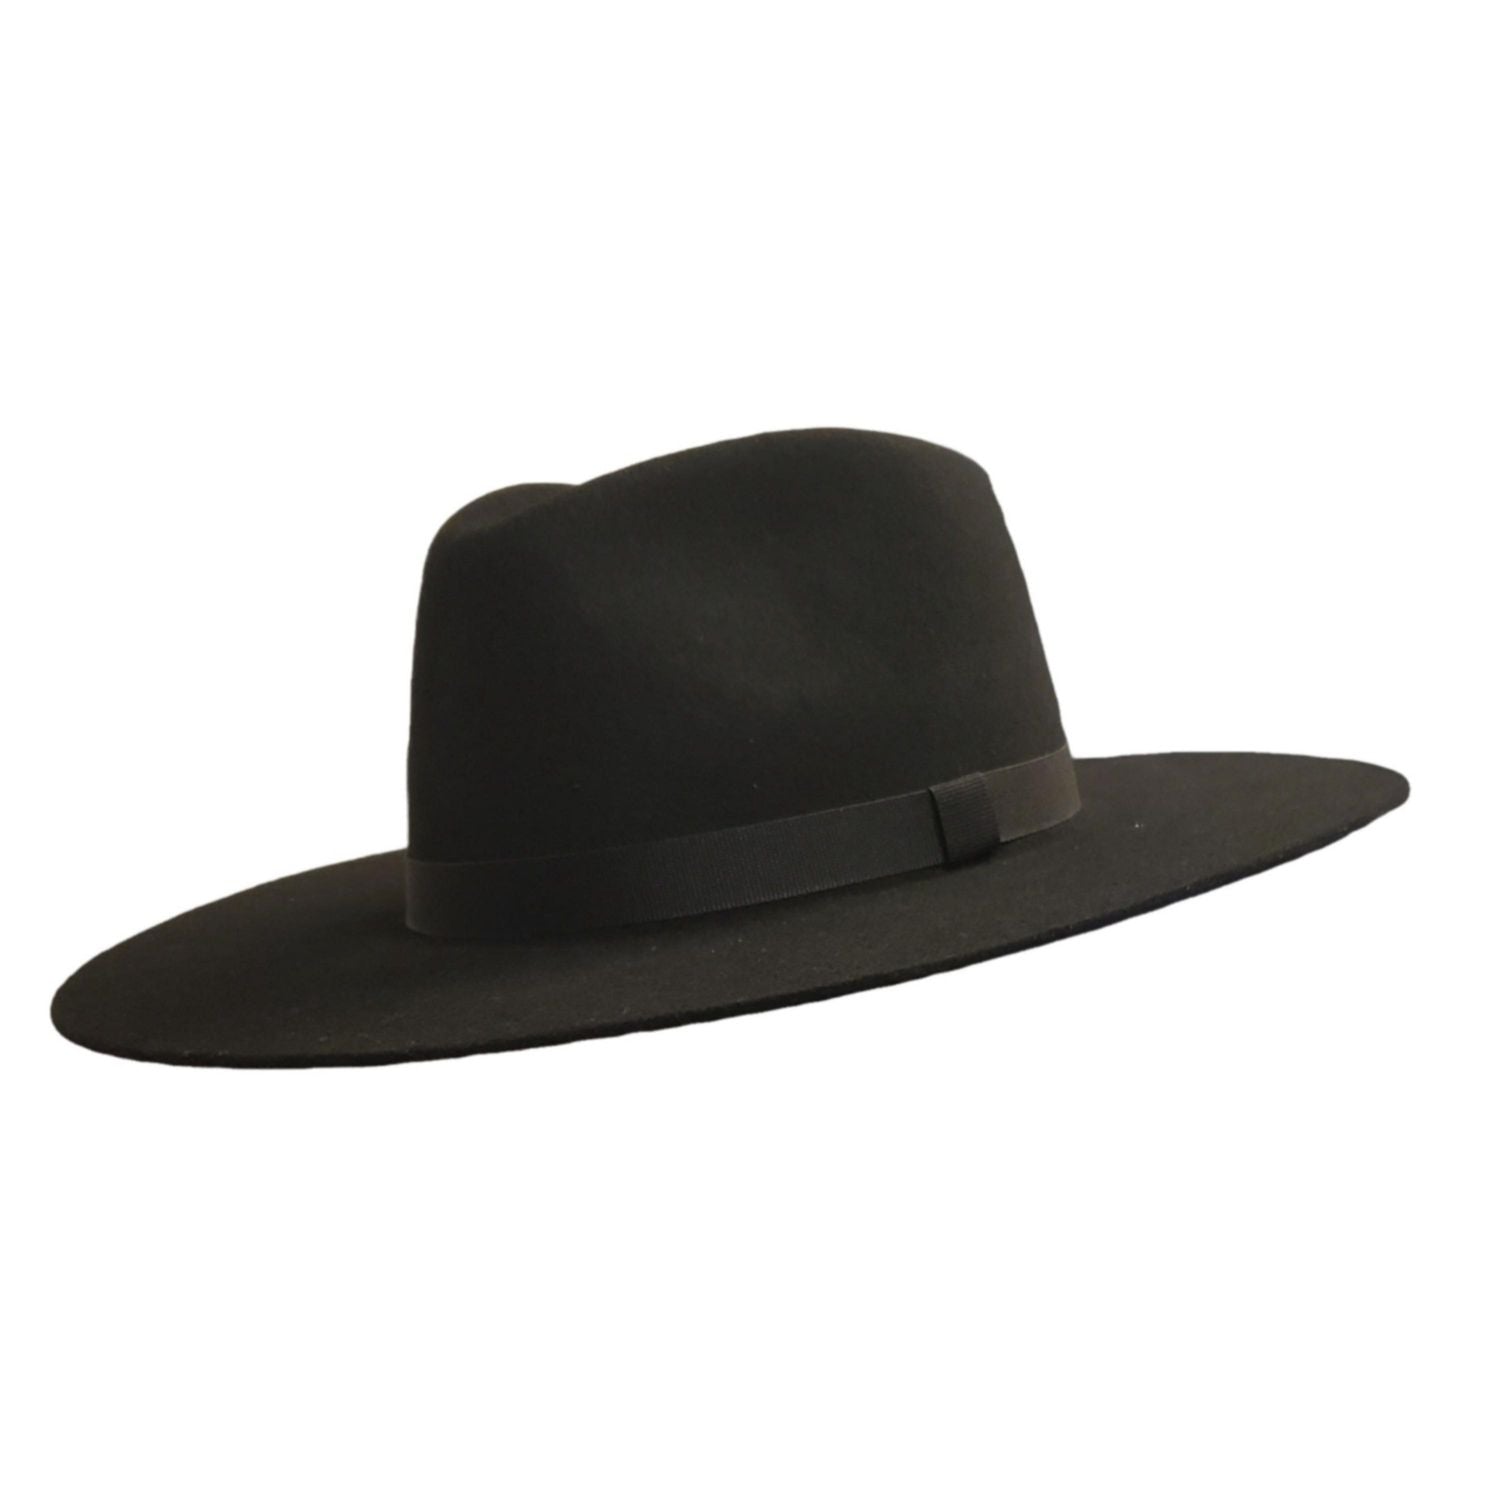 Gone Country Hats Men & Women's Hats Small  fits 6-7/8 to 7 Drifter Black - Wool Cashmere